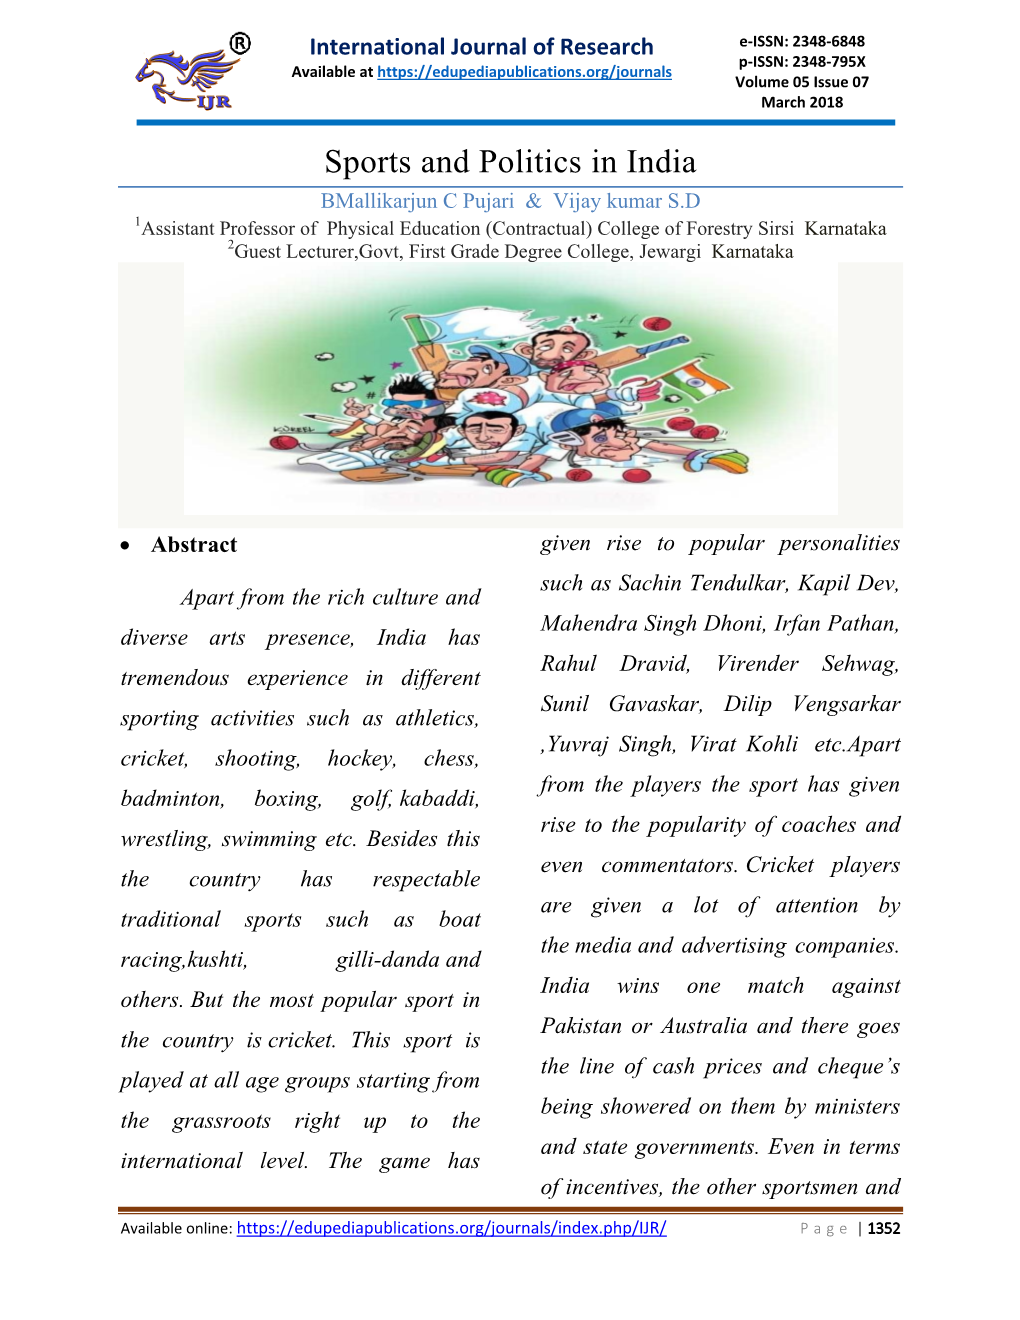 Sports and Politics in India